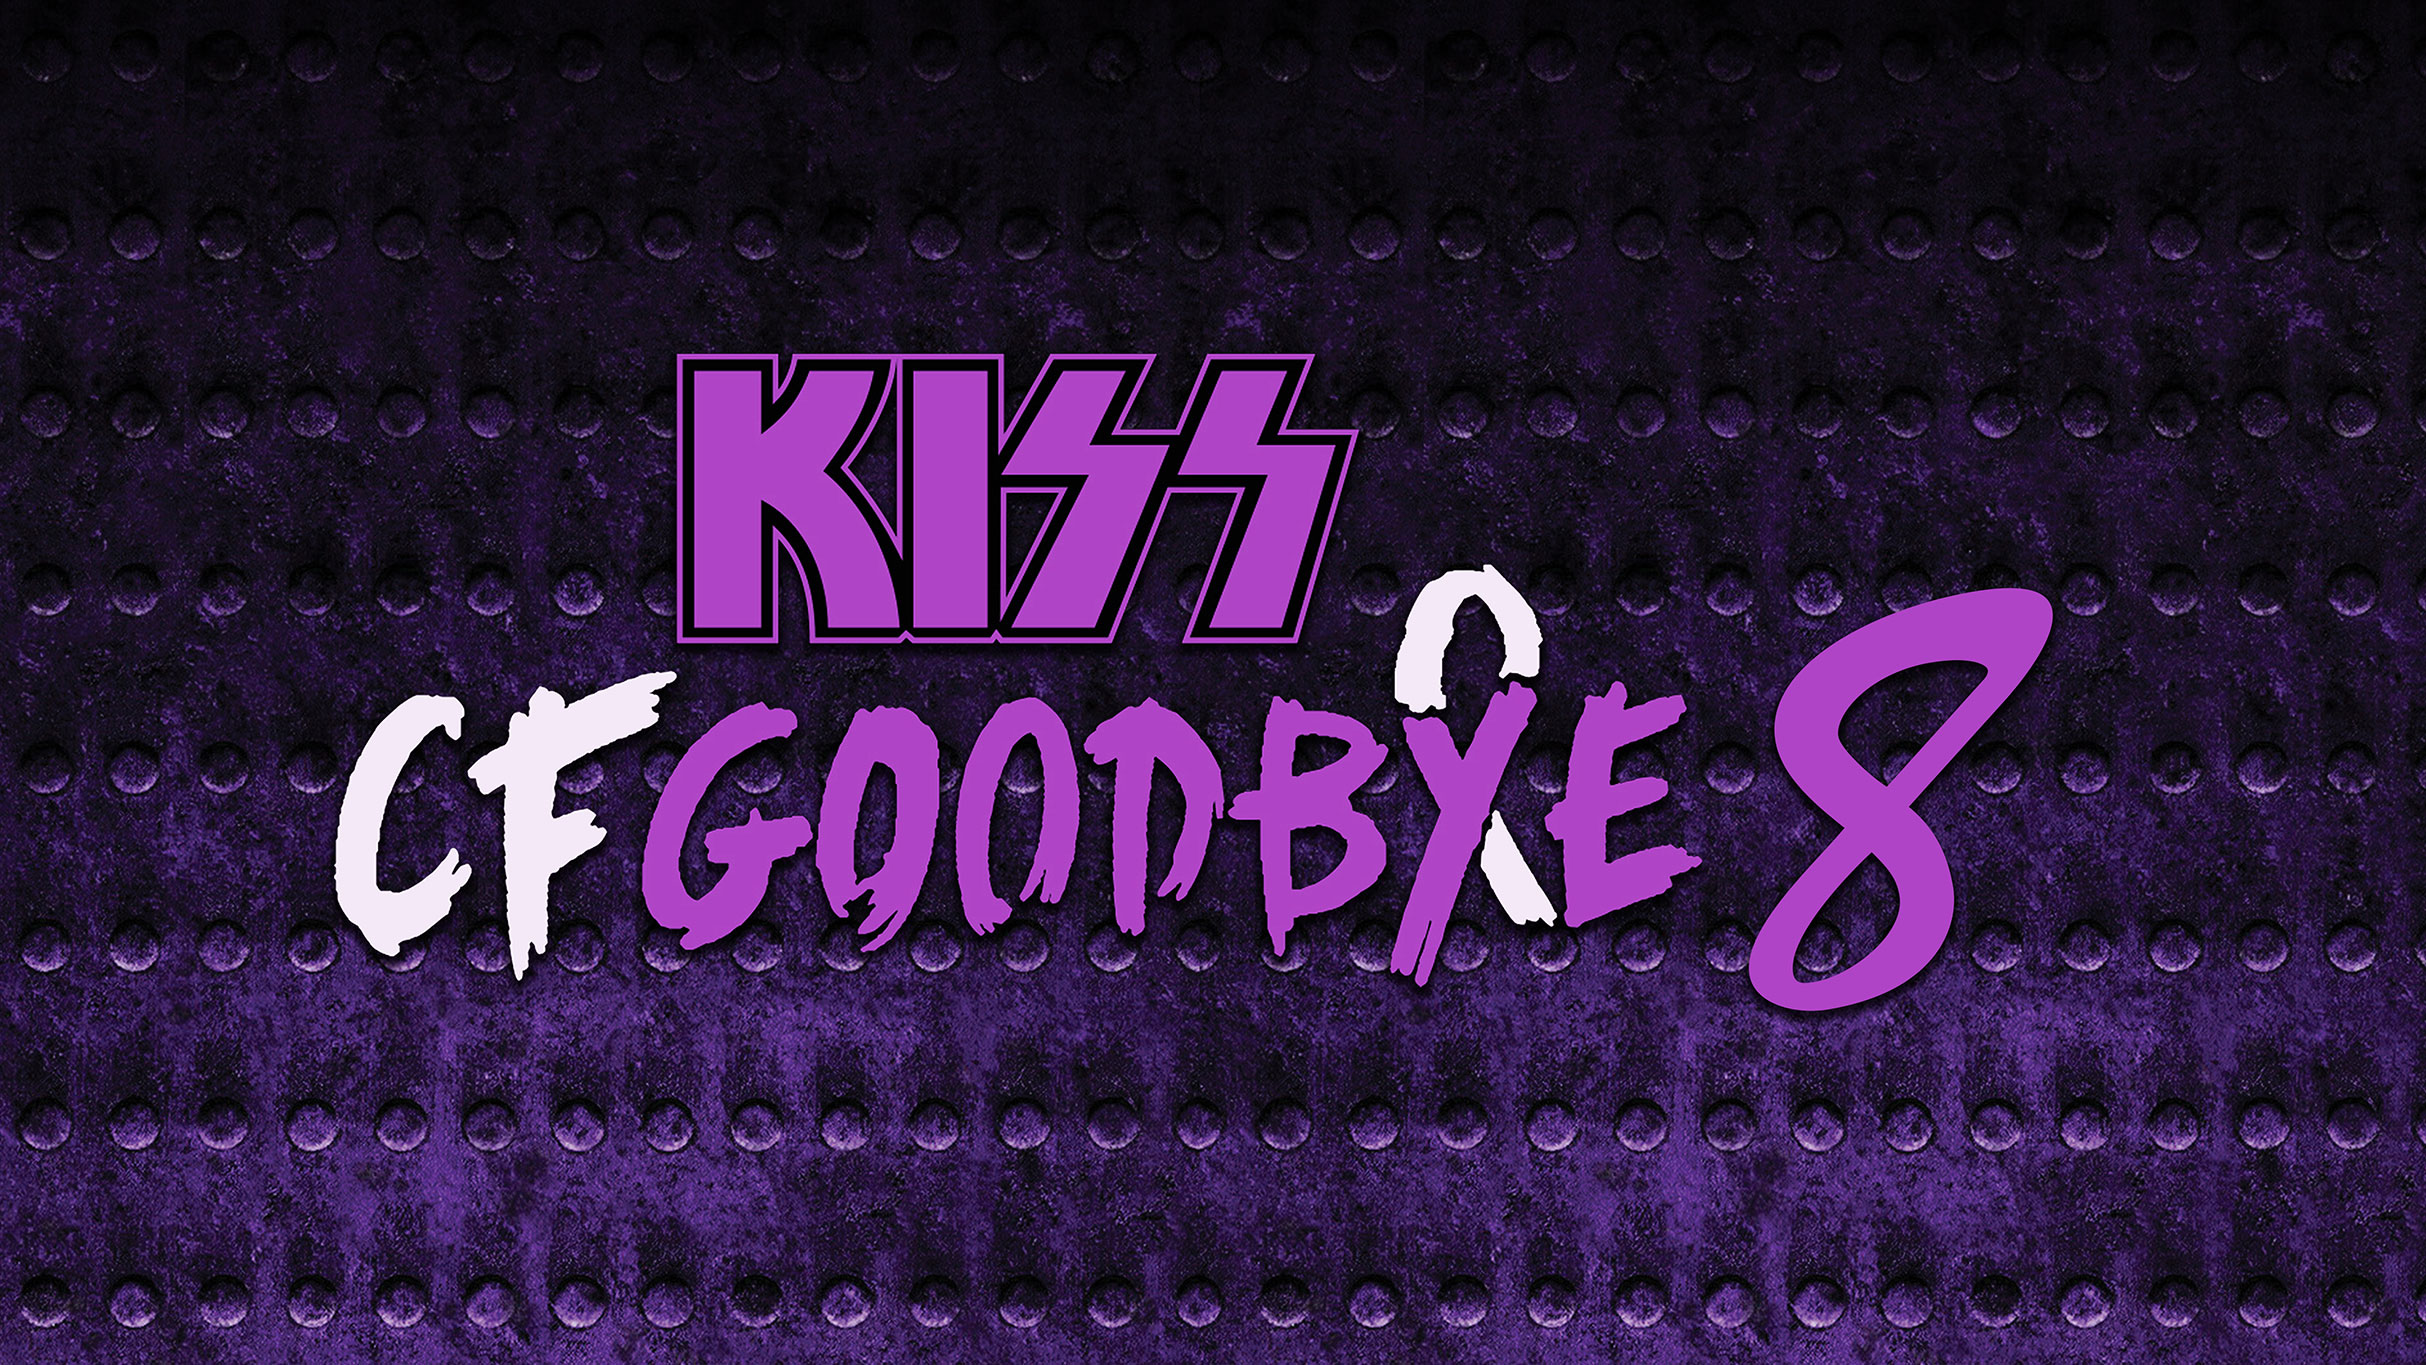 Kiss CF Goodbye #8 - Raising Awareness and Funds for Cystic Fibrosis